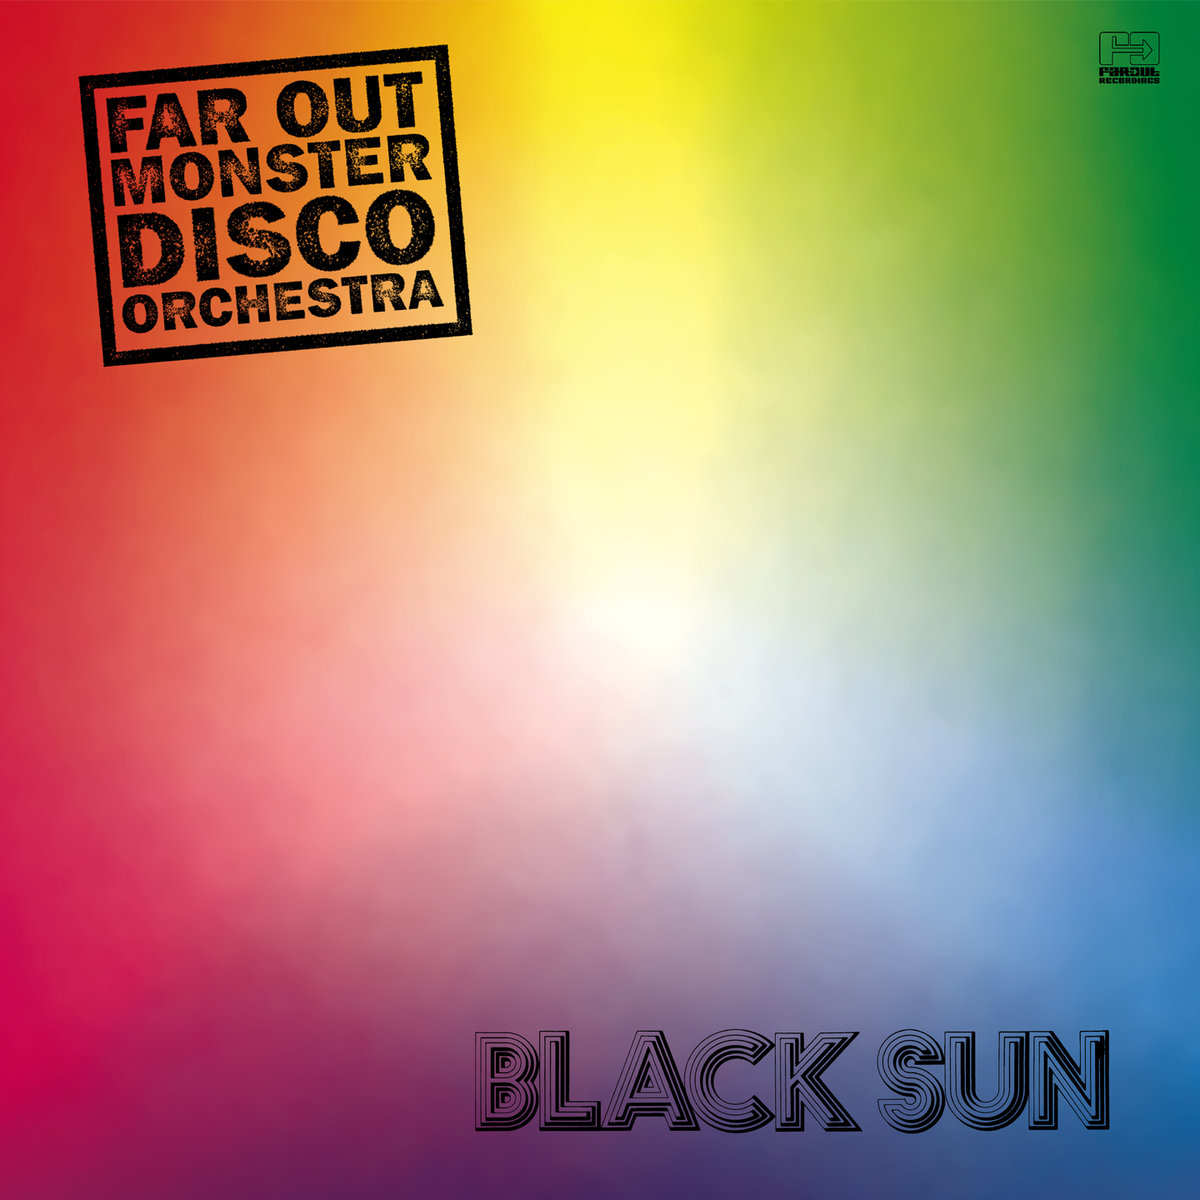 The Far Out Monster Disco Orchestra – Black Sun